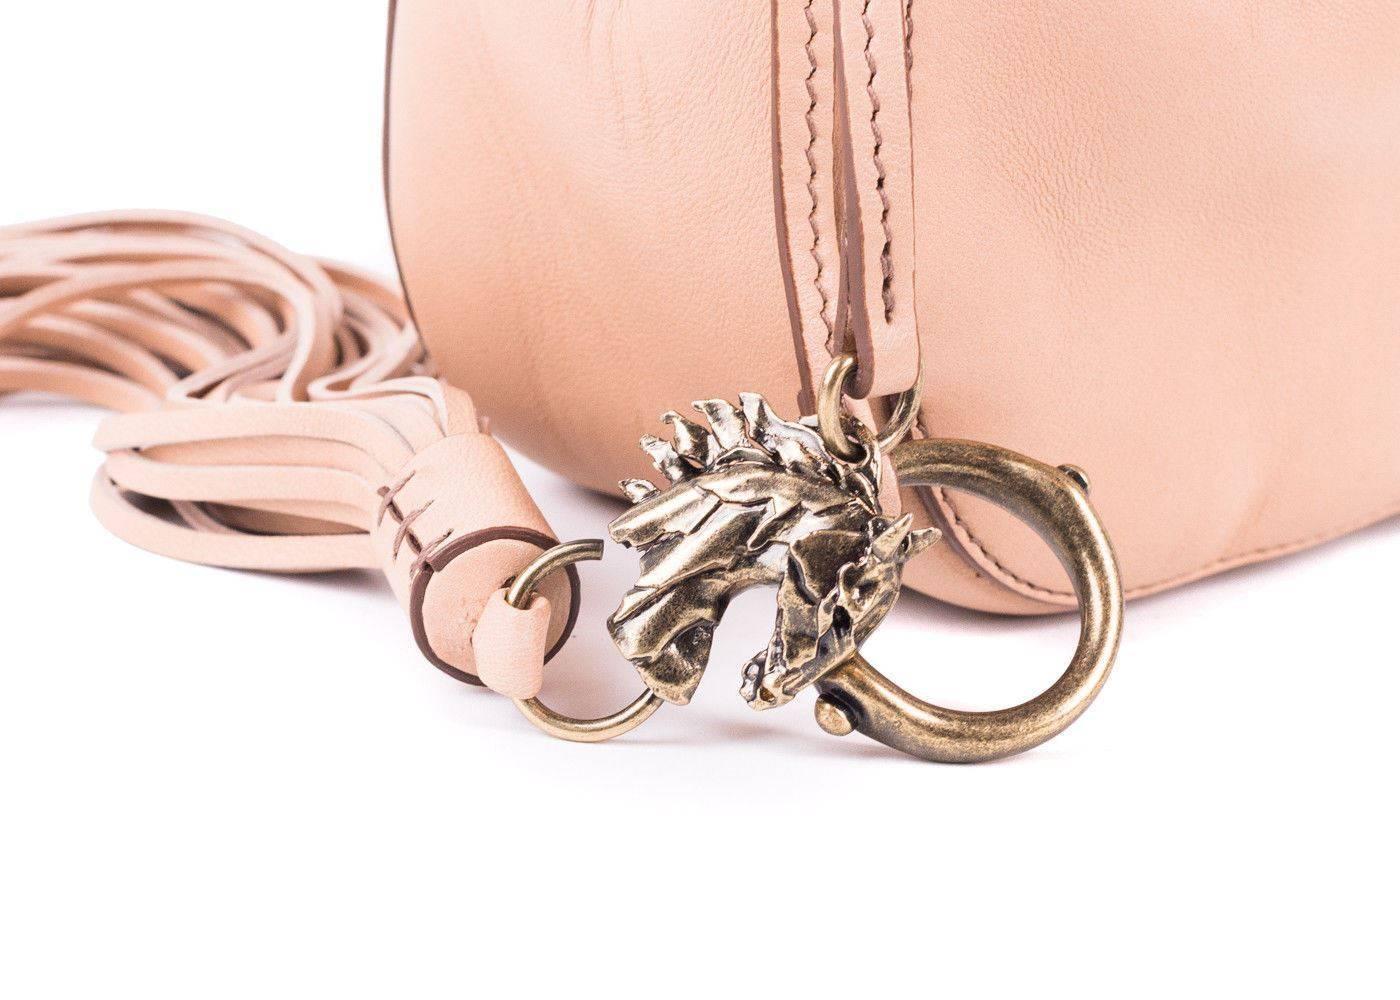 Brand New Roberto Cavalli Mini Wristlet Bucket Bag
Original Tag & Dust Bag Included
Retails In-Stores & Online for $1480
Dimensions: 5.5"L x 2.5"W x 6"D 6" Drop



Revamp your accessories closet with this uniquely crafted